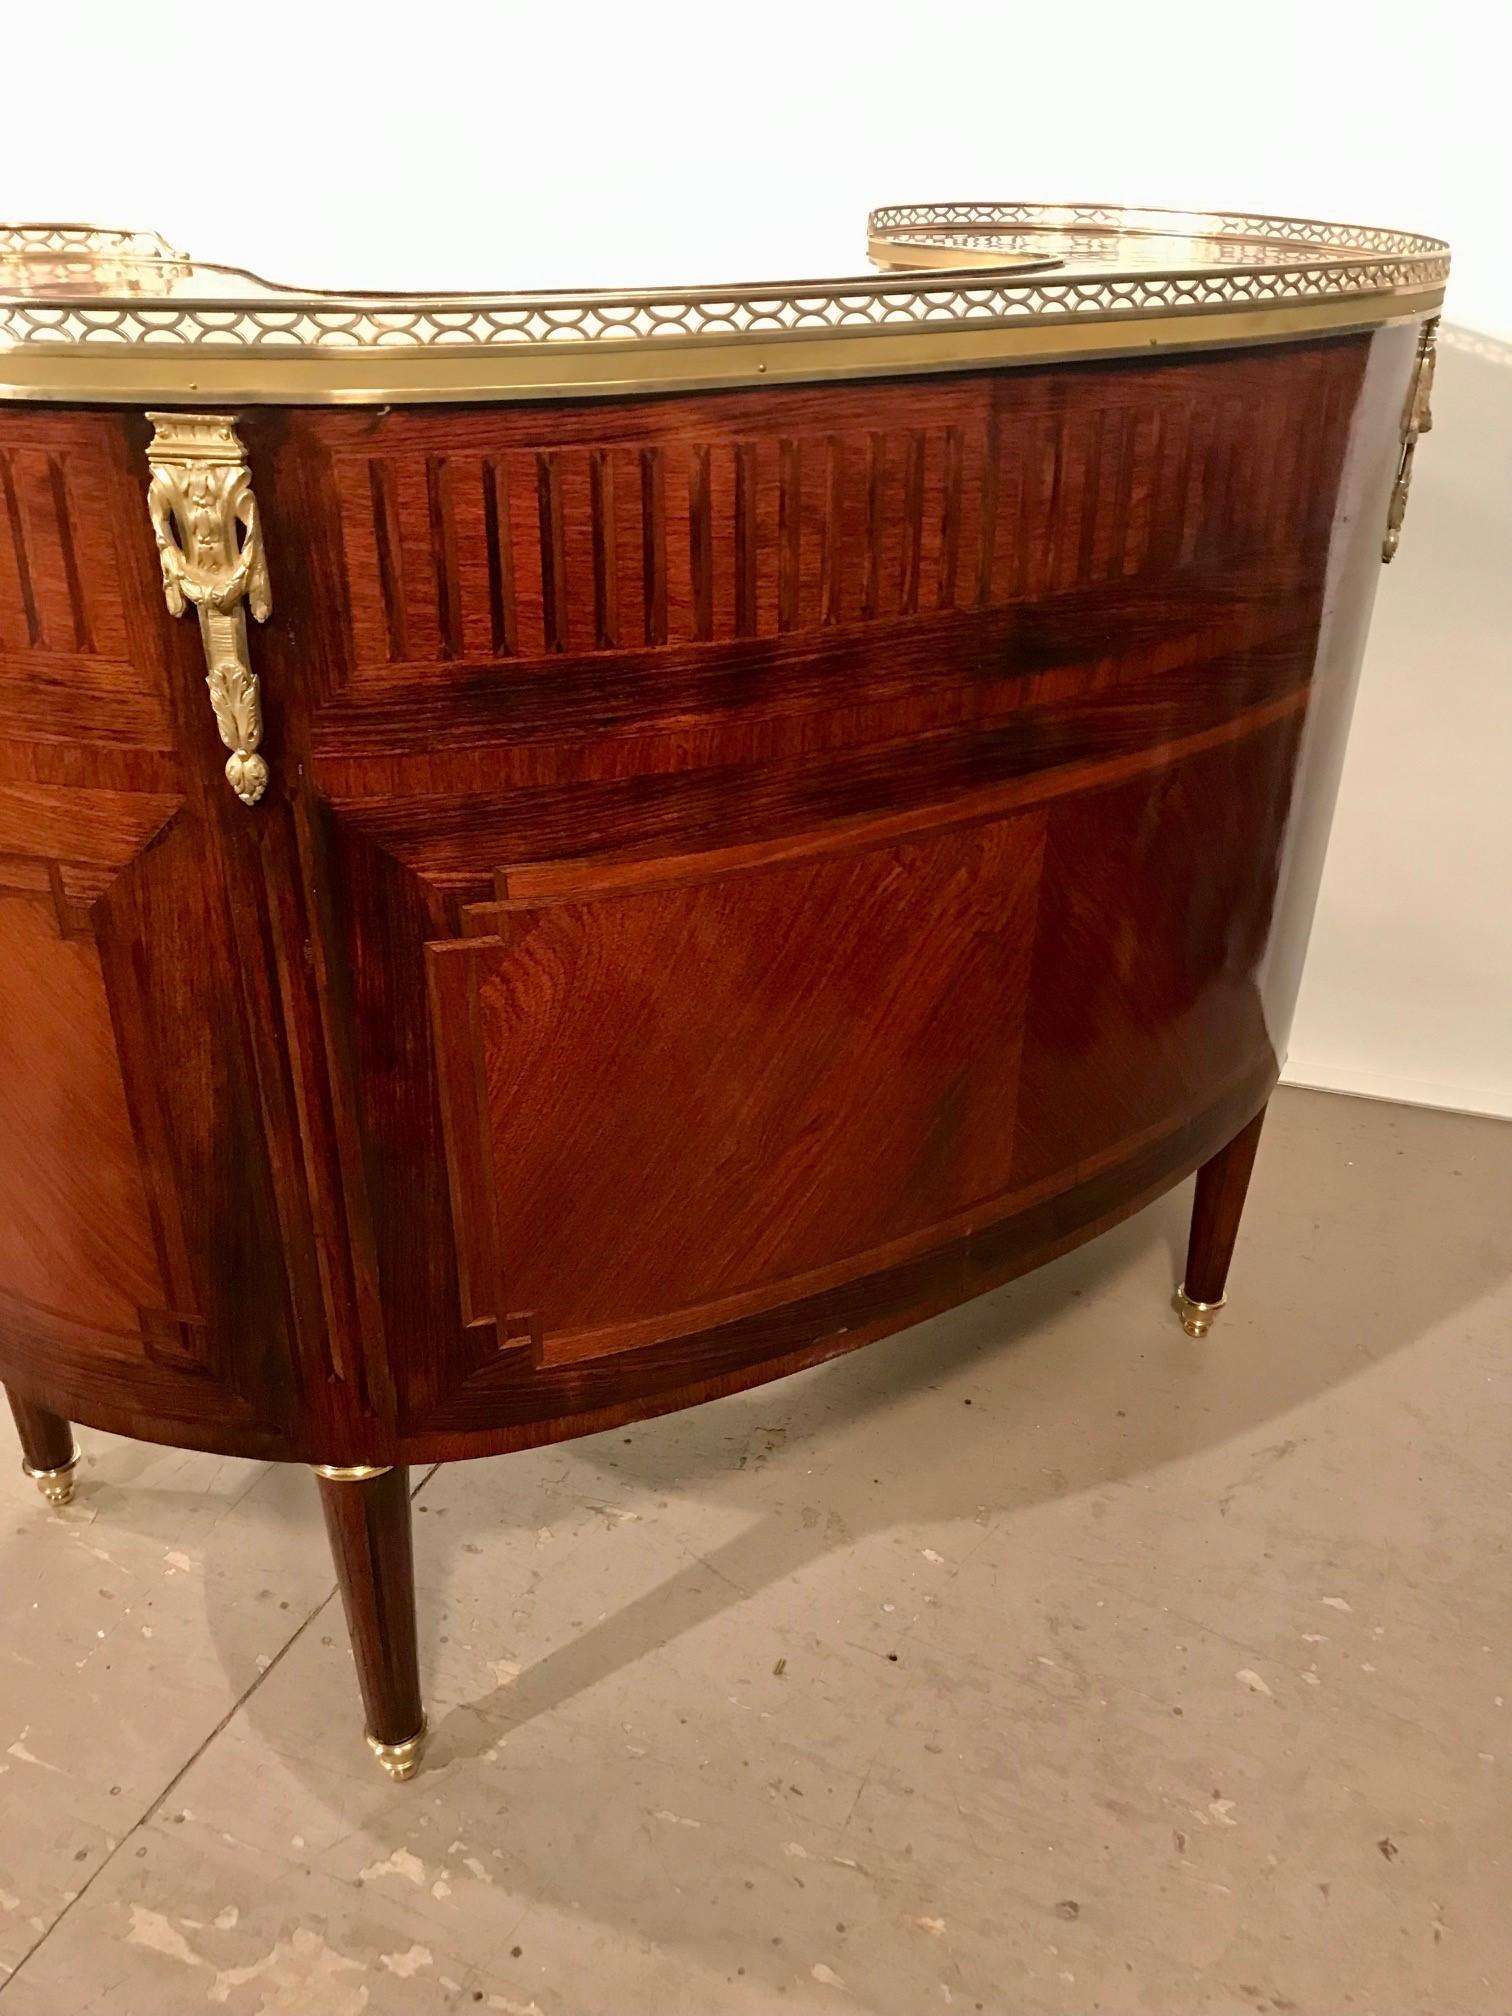 Antique French Louis XVI Style Mahogany and Parquetry Bureau a Rognon For Sale 4